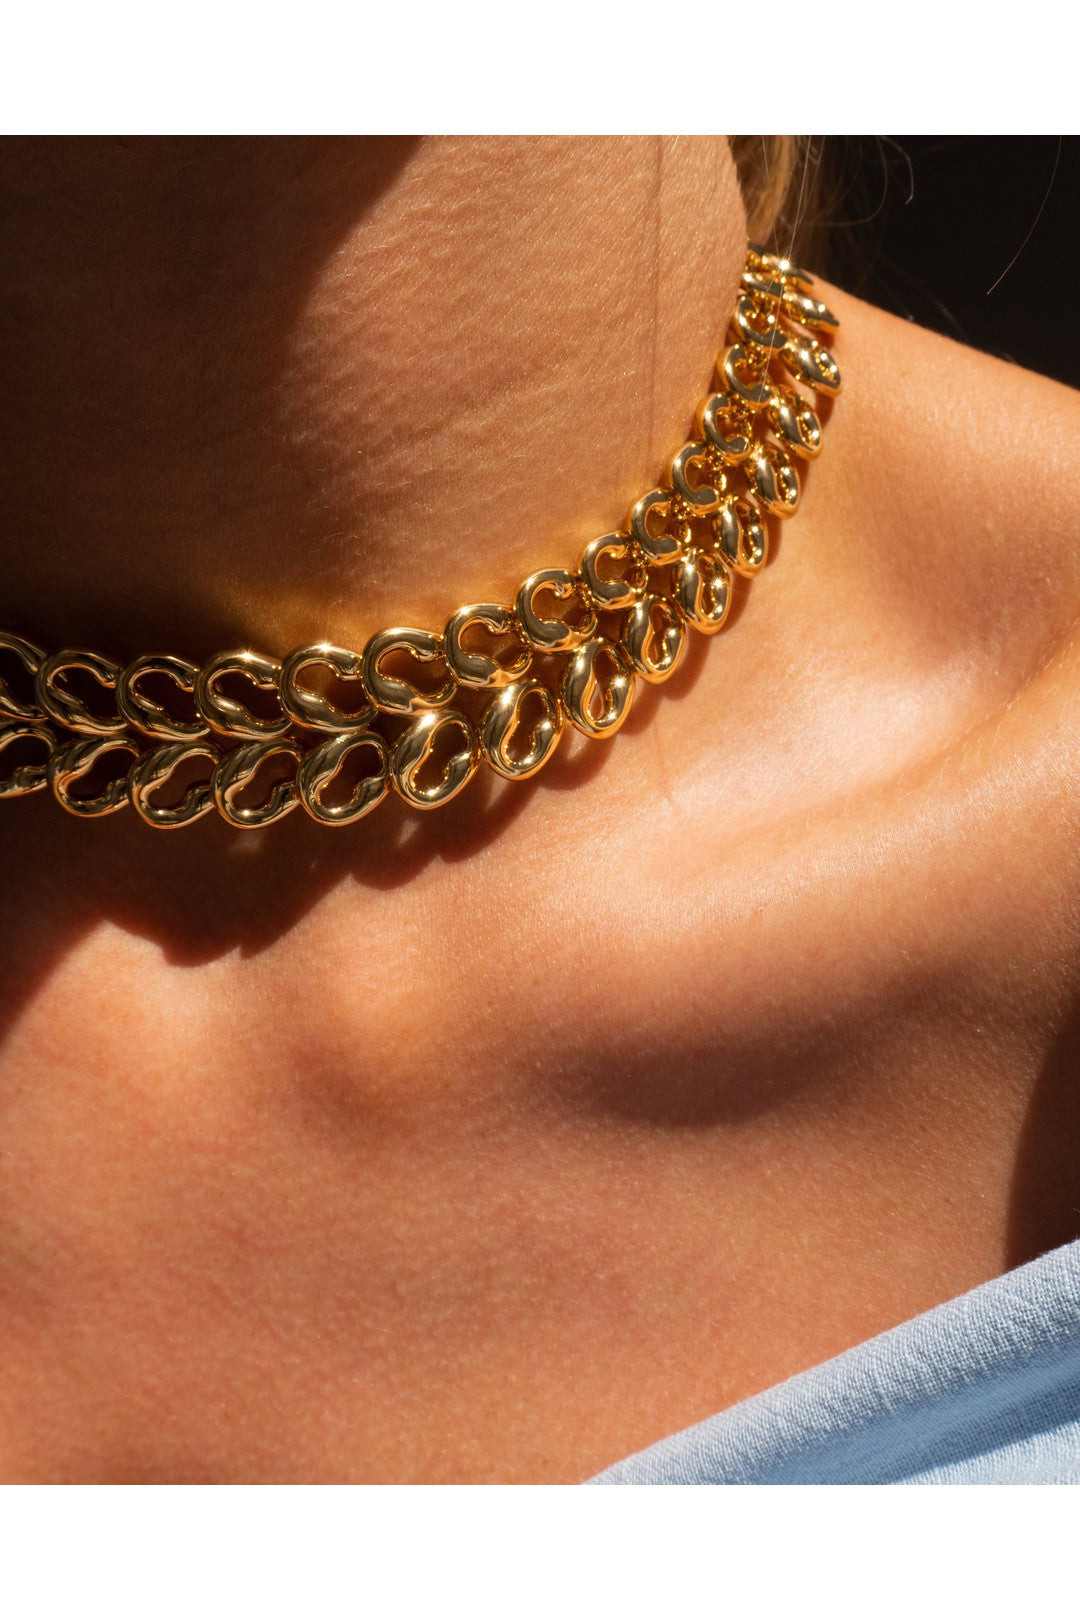 The metal lace choker, gold